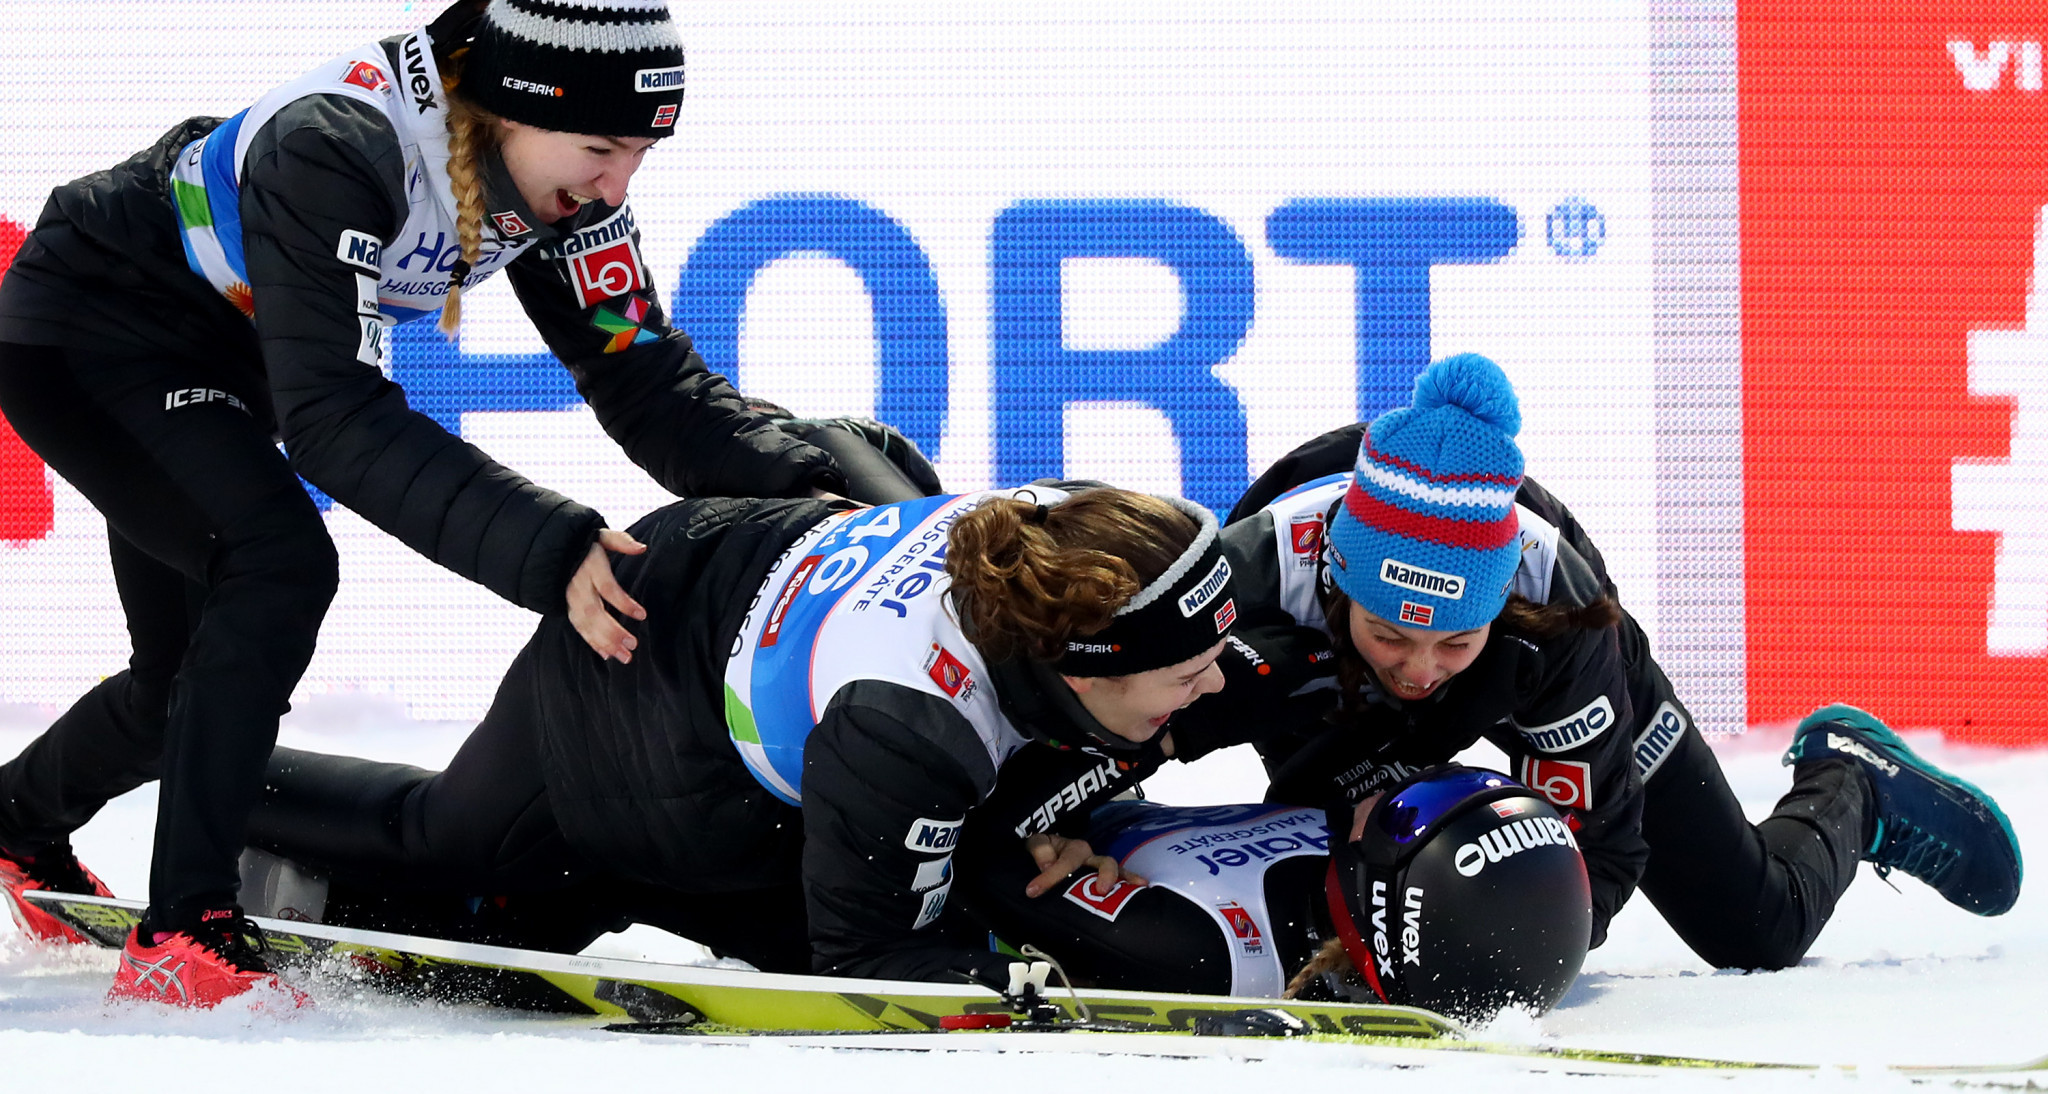 Back on the snow Norway's Maren Lundby was swamped by her teammates after winning the women's ski jumping final ©Getty Images